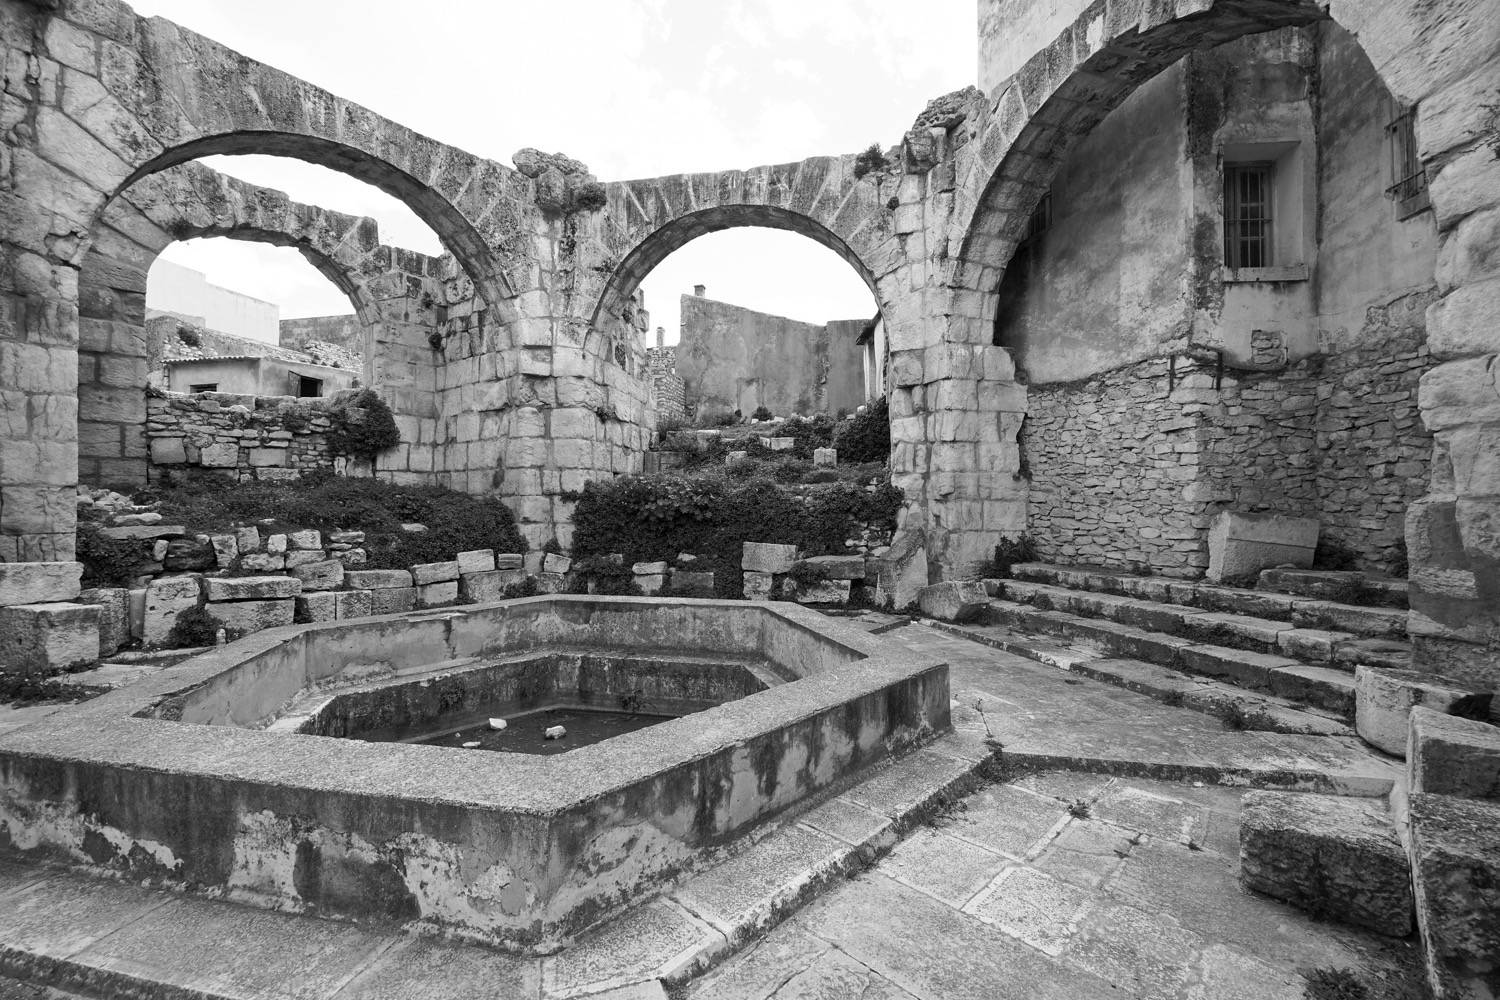 General view. The Roman Baths. View of the "frigidarium" with a hexagonal pool in the center